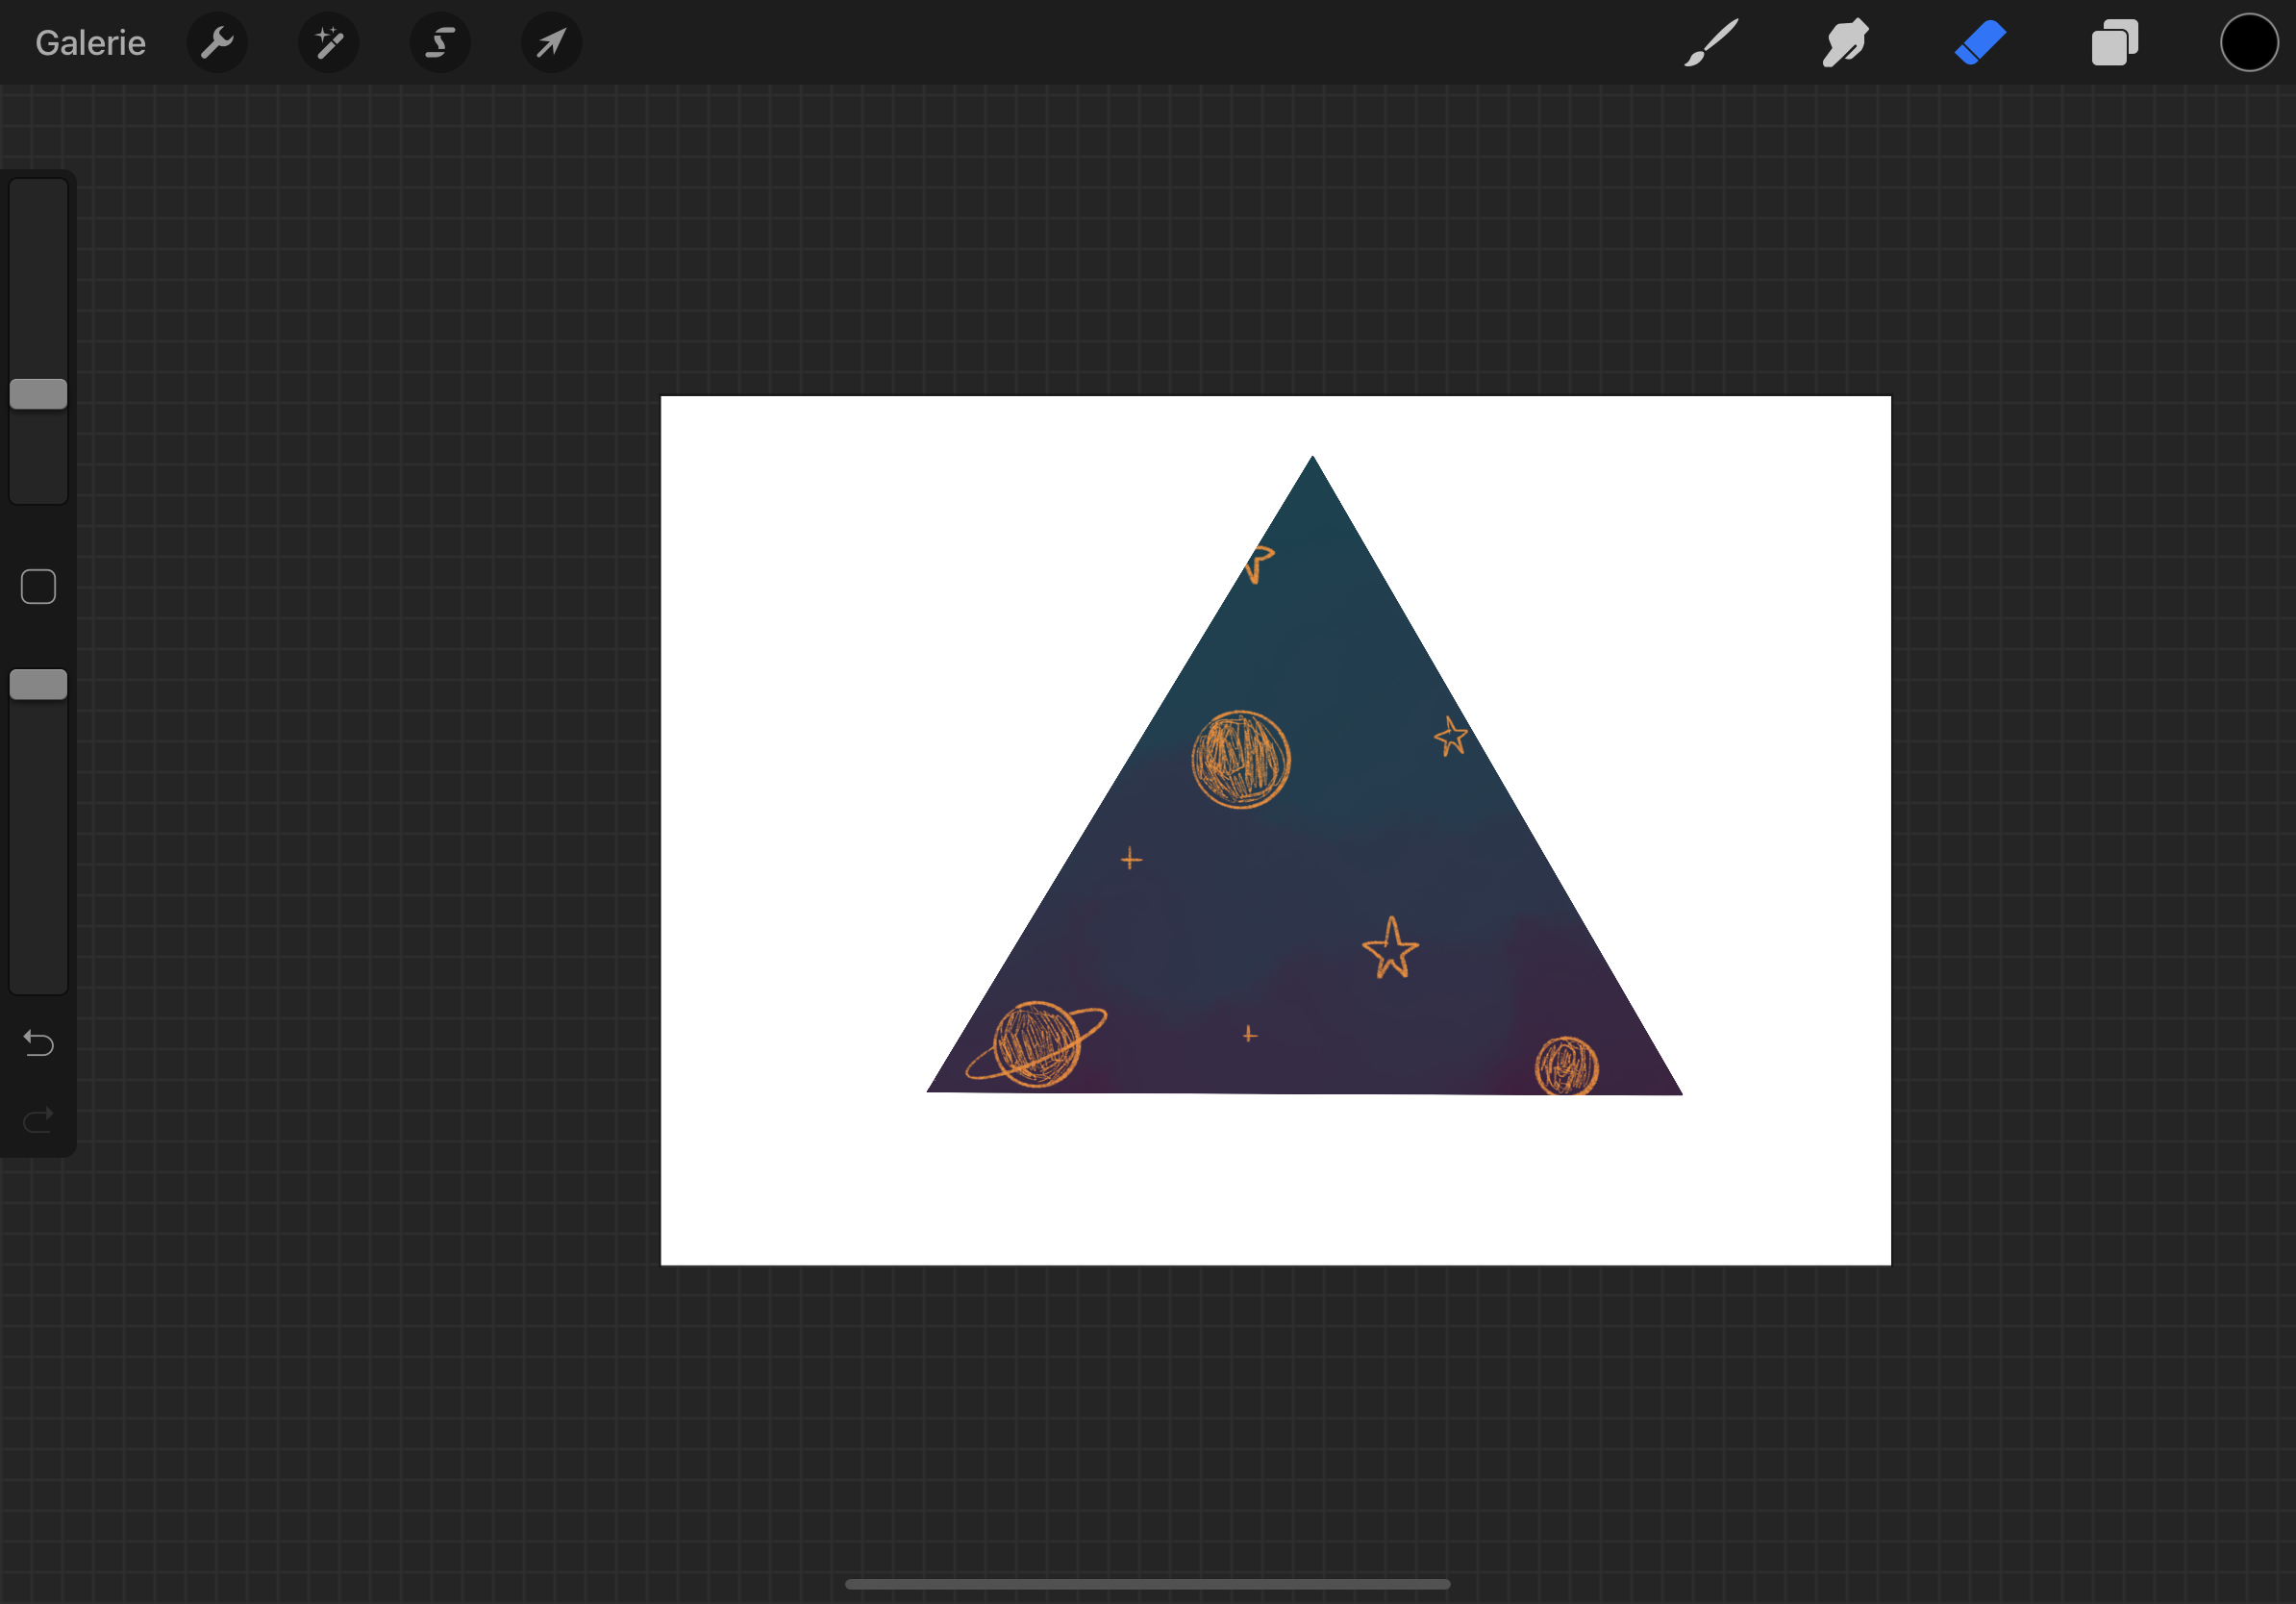 How to copy a shape in Procreate?